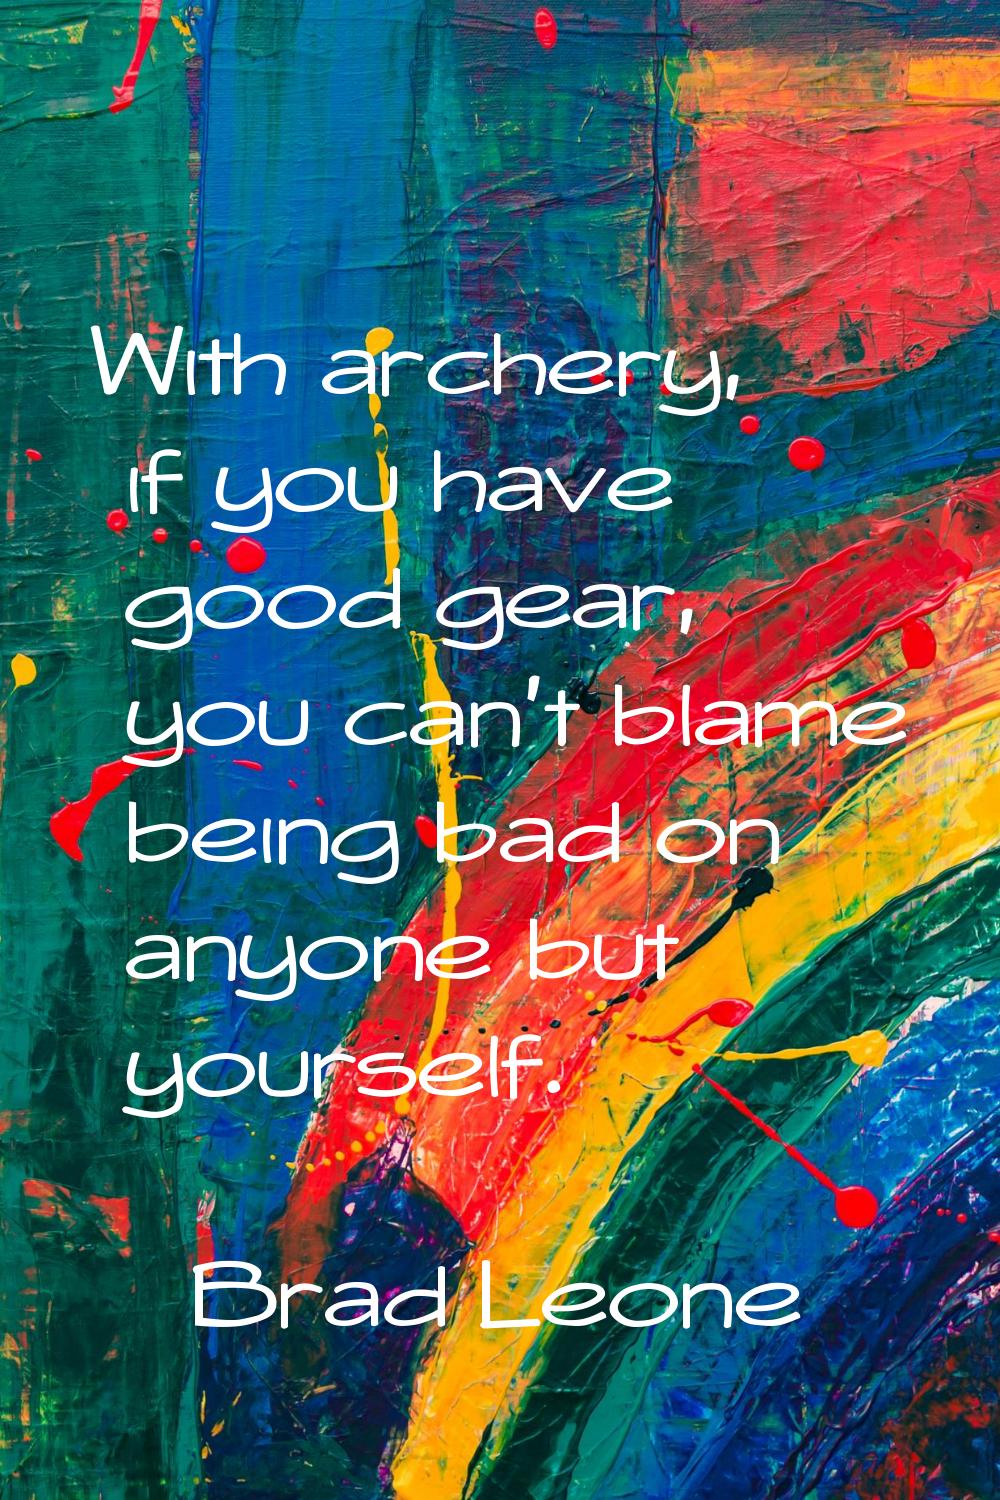 With archery, if you have good gear, you can't blame being bad on anyone but yourself.